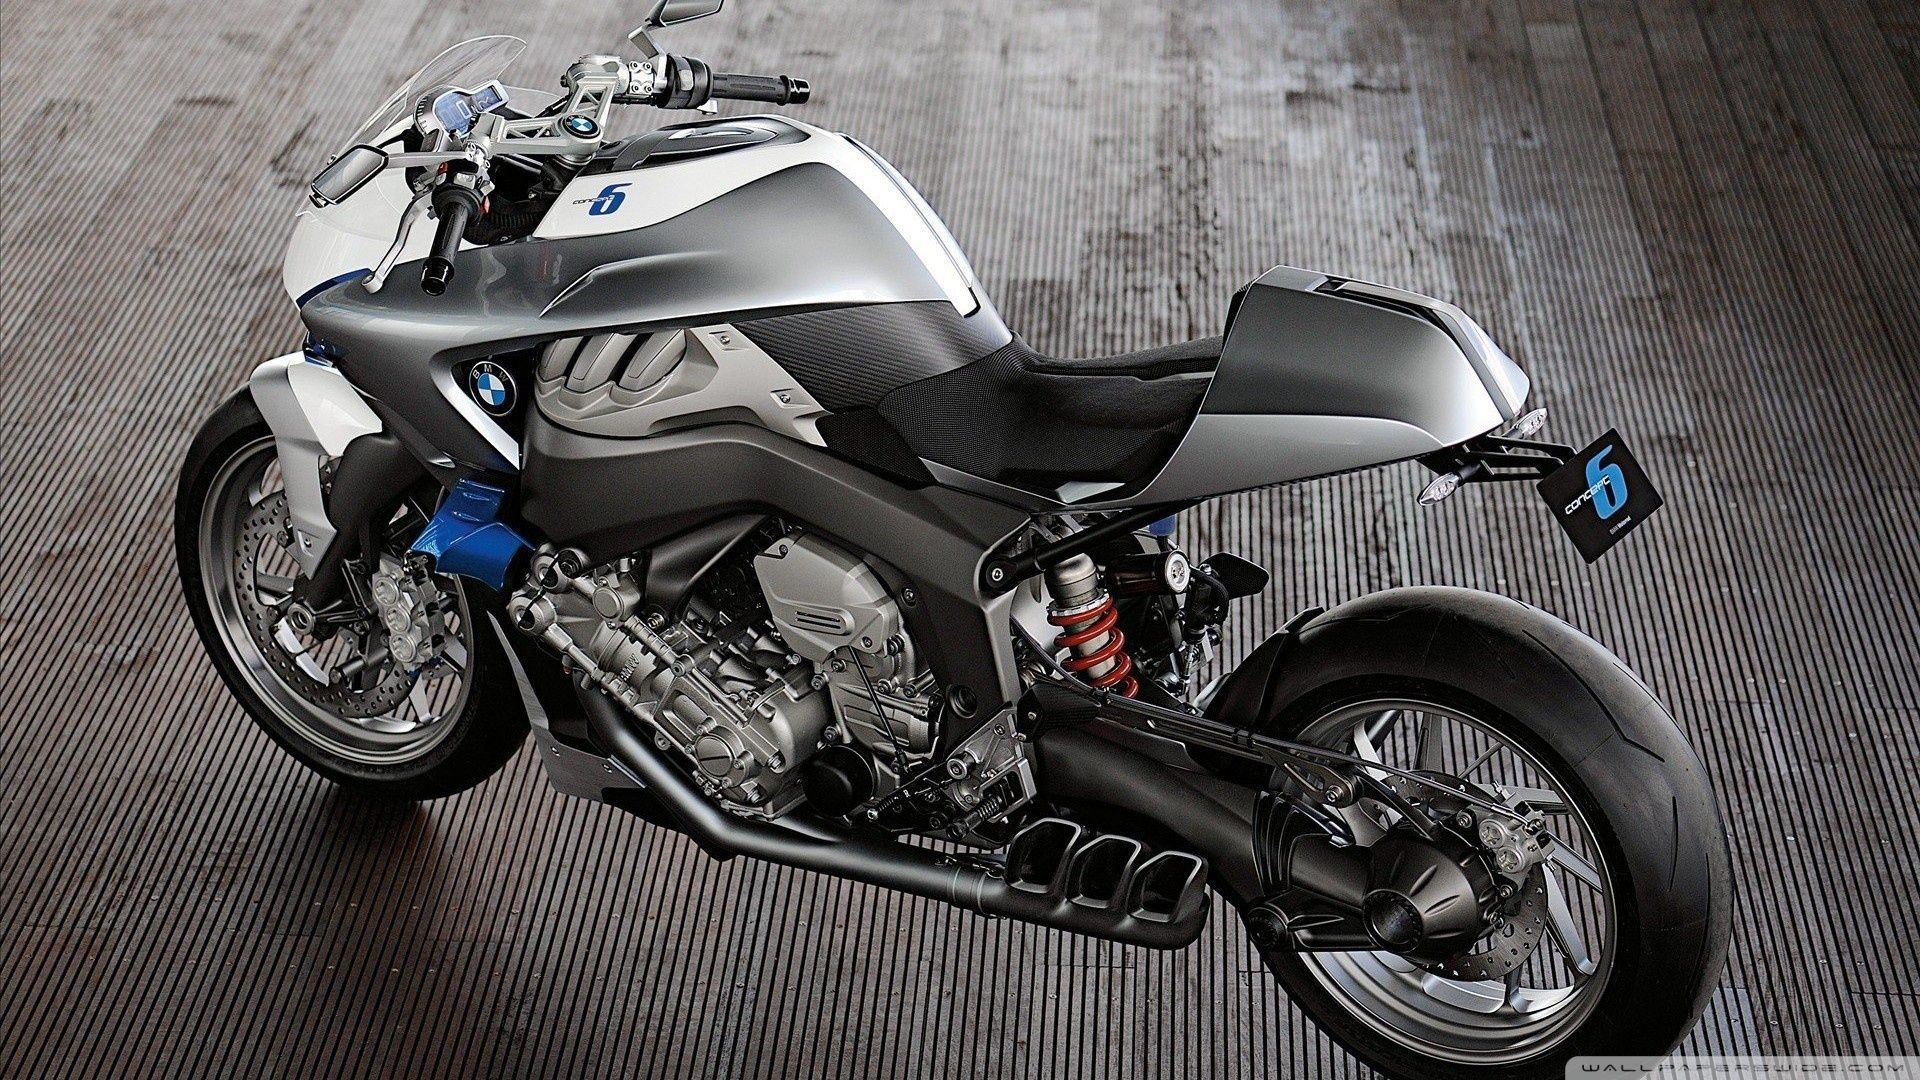 BMW Concept Motorcycle Wallpapers on WallpaperDog